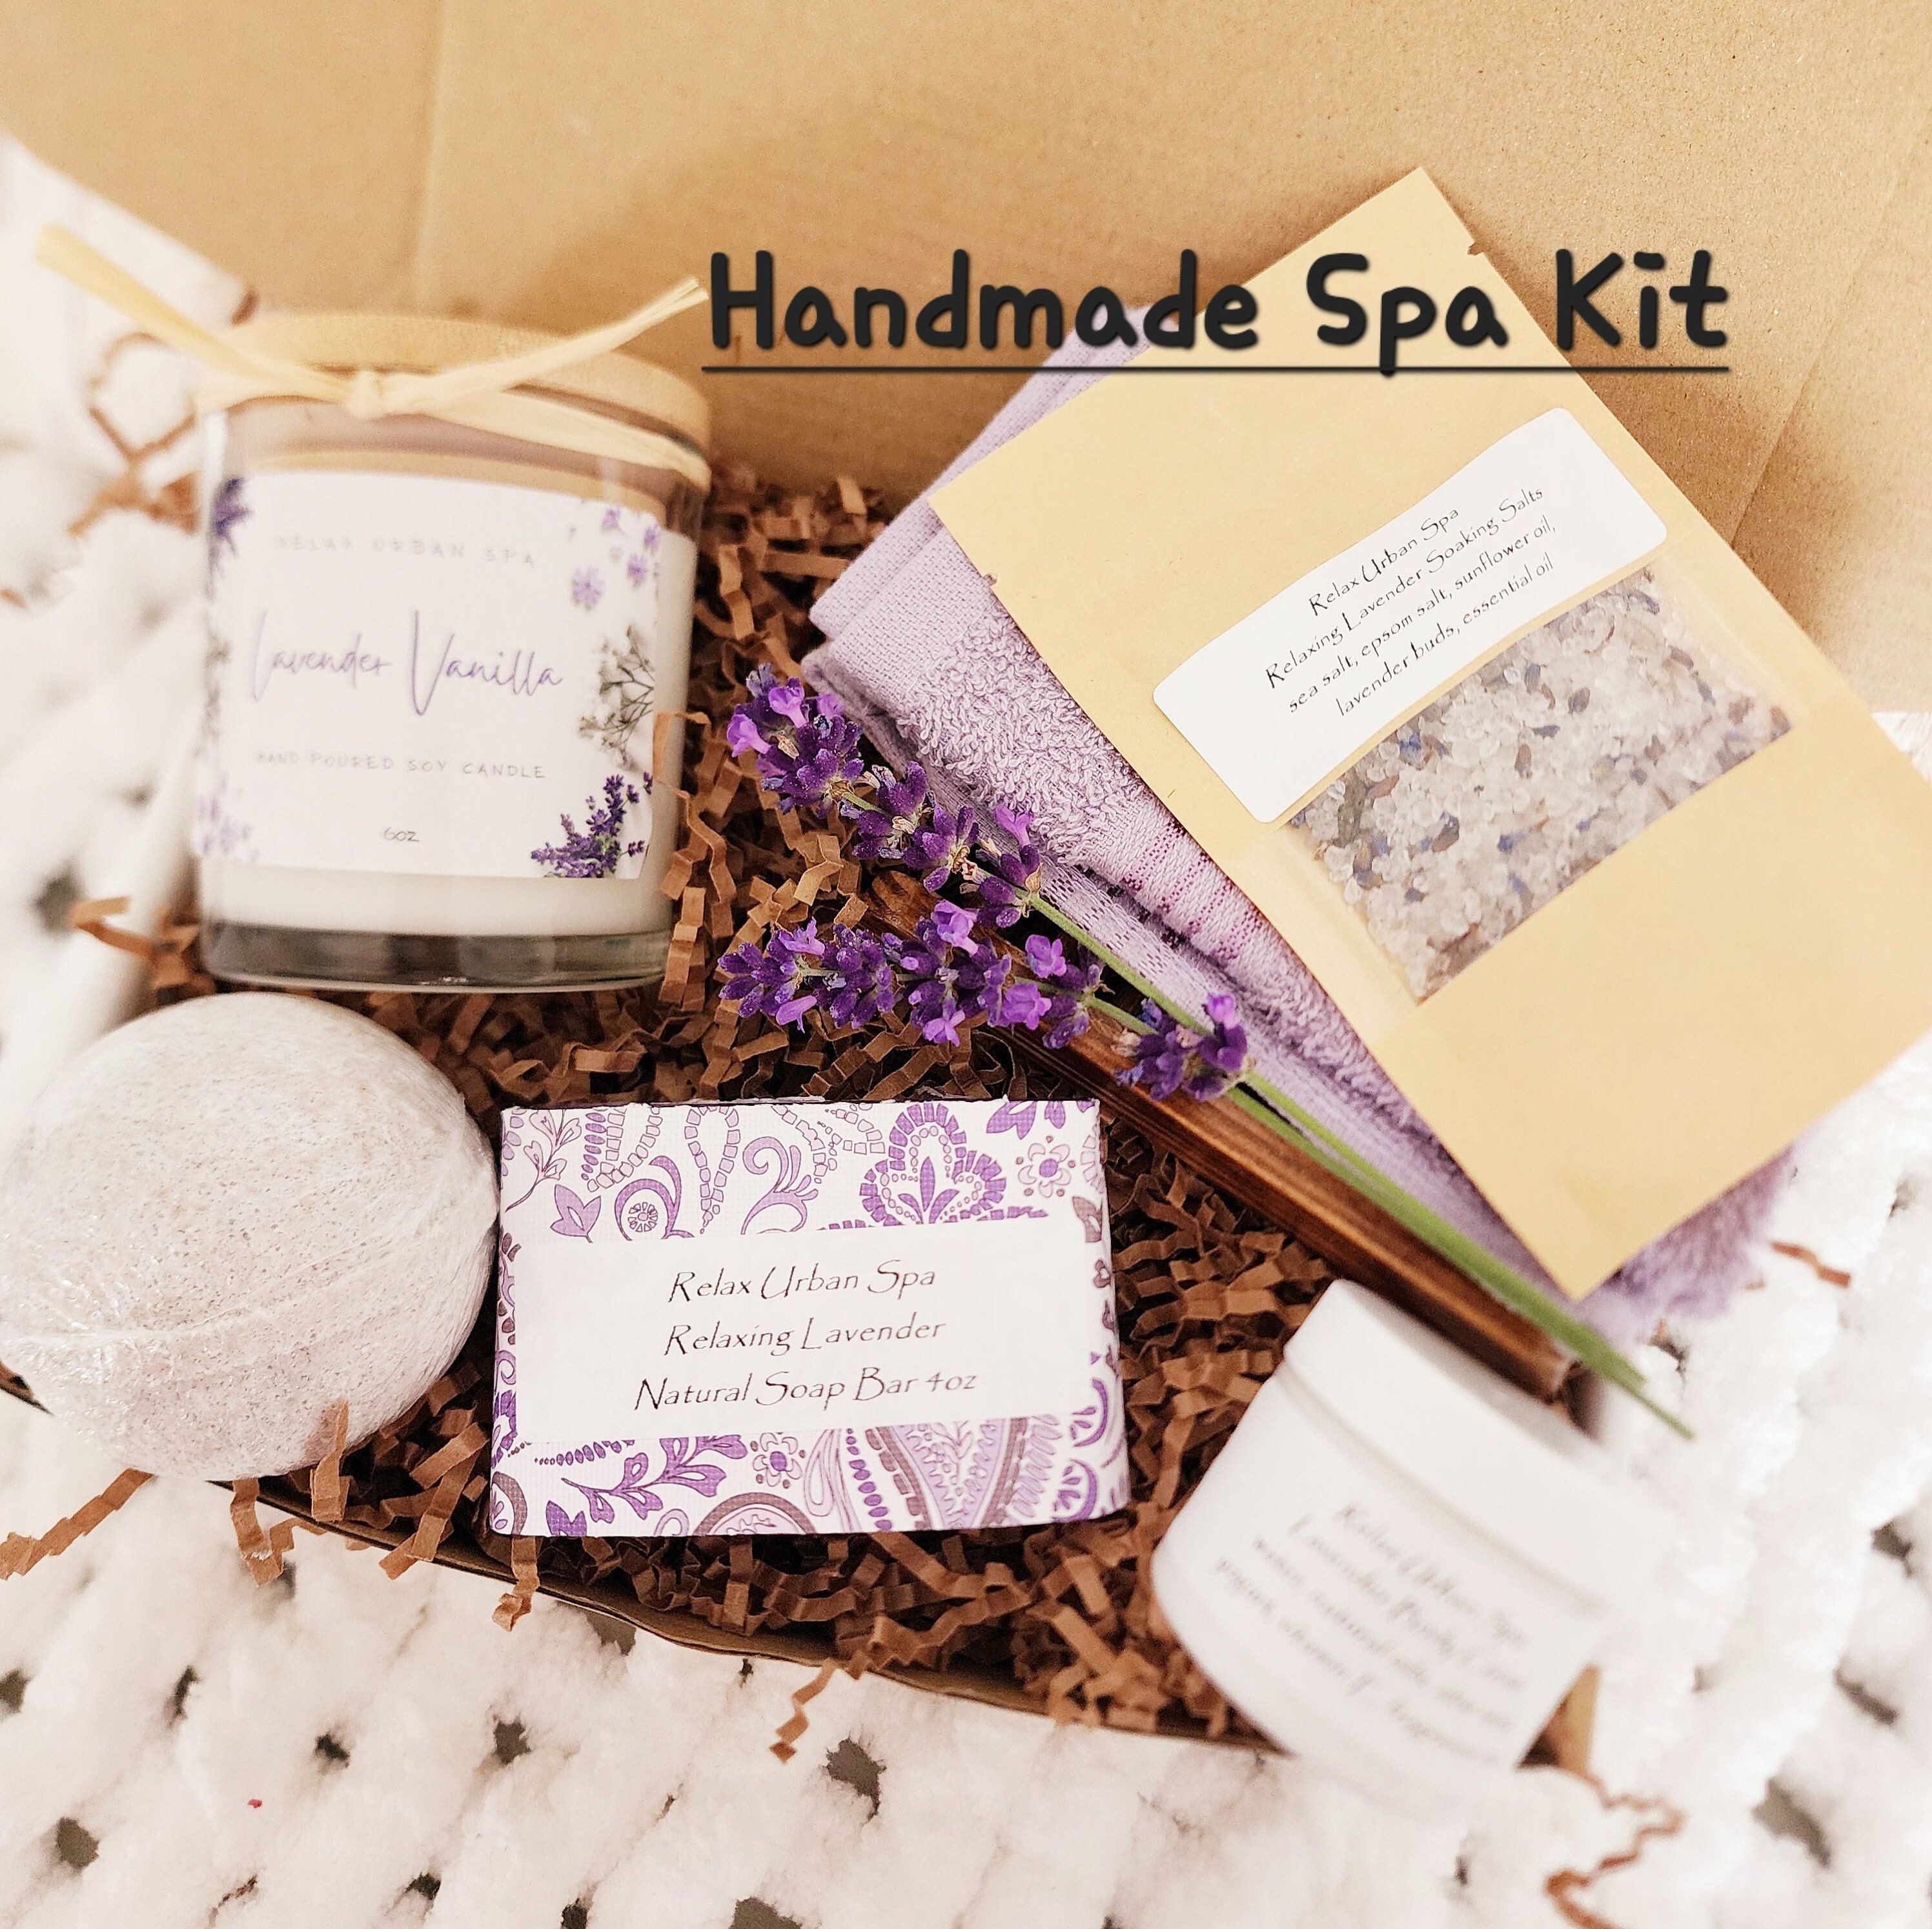 Relaxing Lavender Spa Box for Her - Self Care Relaxation Gifts Spa Kit  Handmade Soap Body Butter Bath Salt Soak